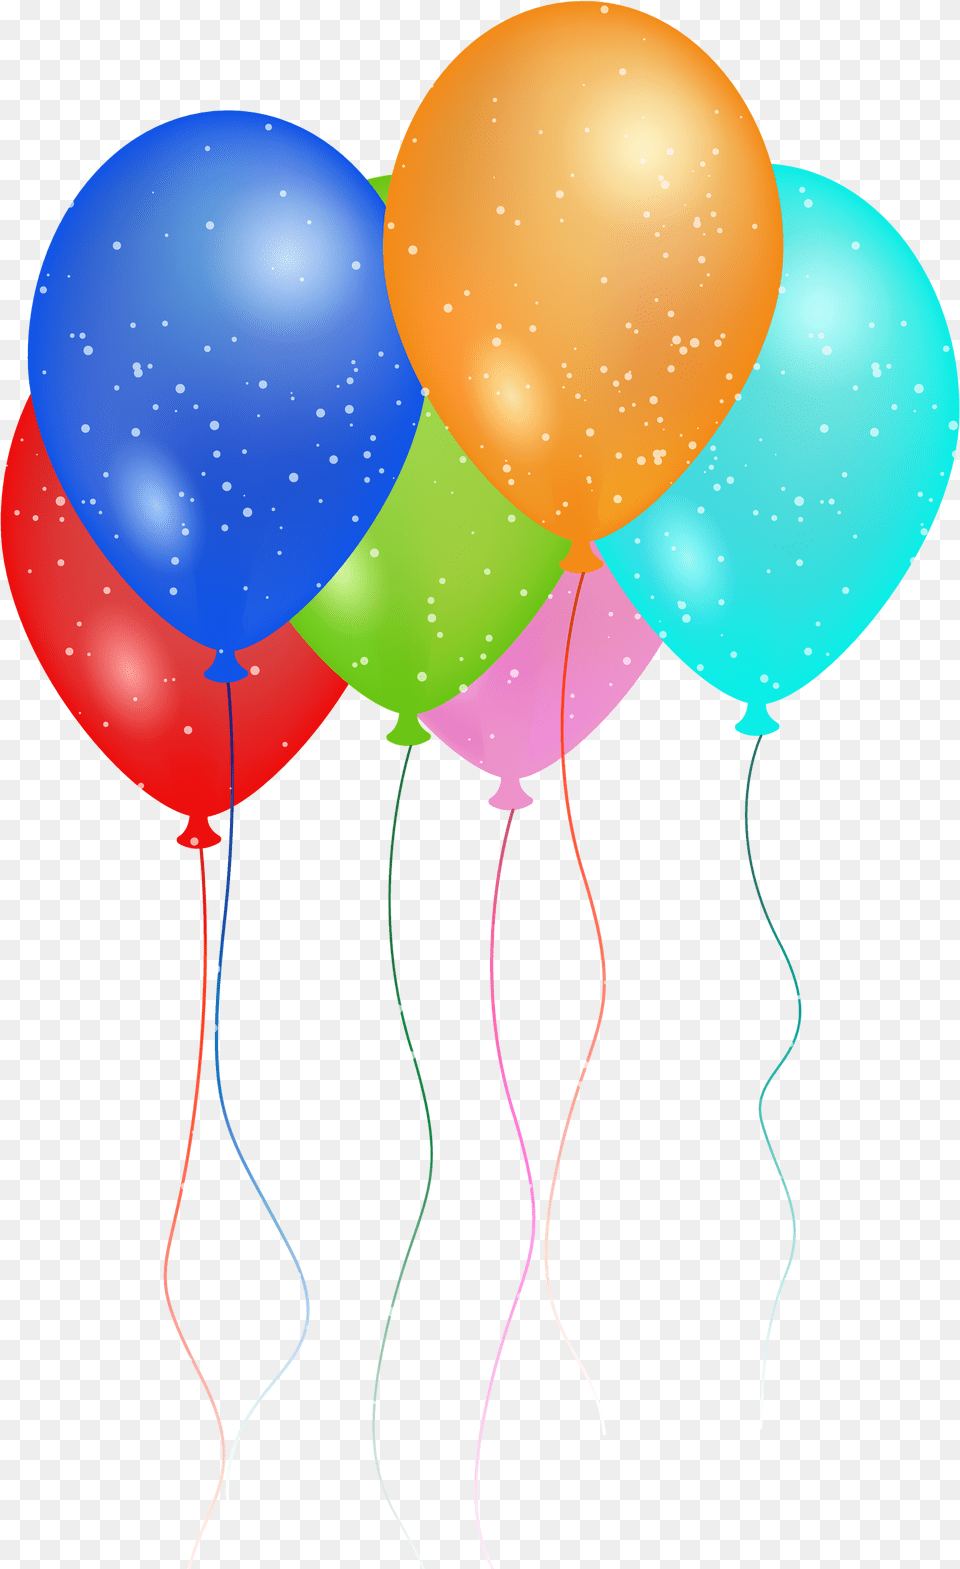 Birthday Party Balloon Image Happy Birthday Balloons Images Free Png